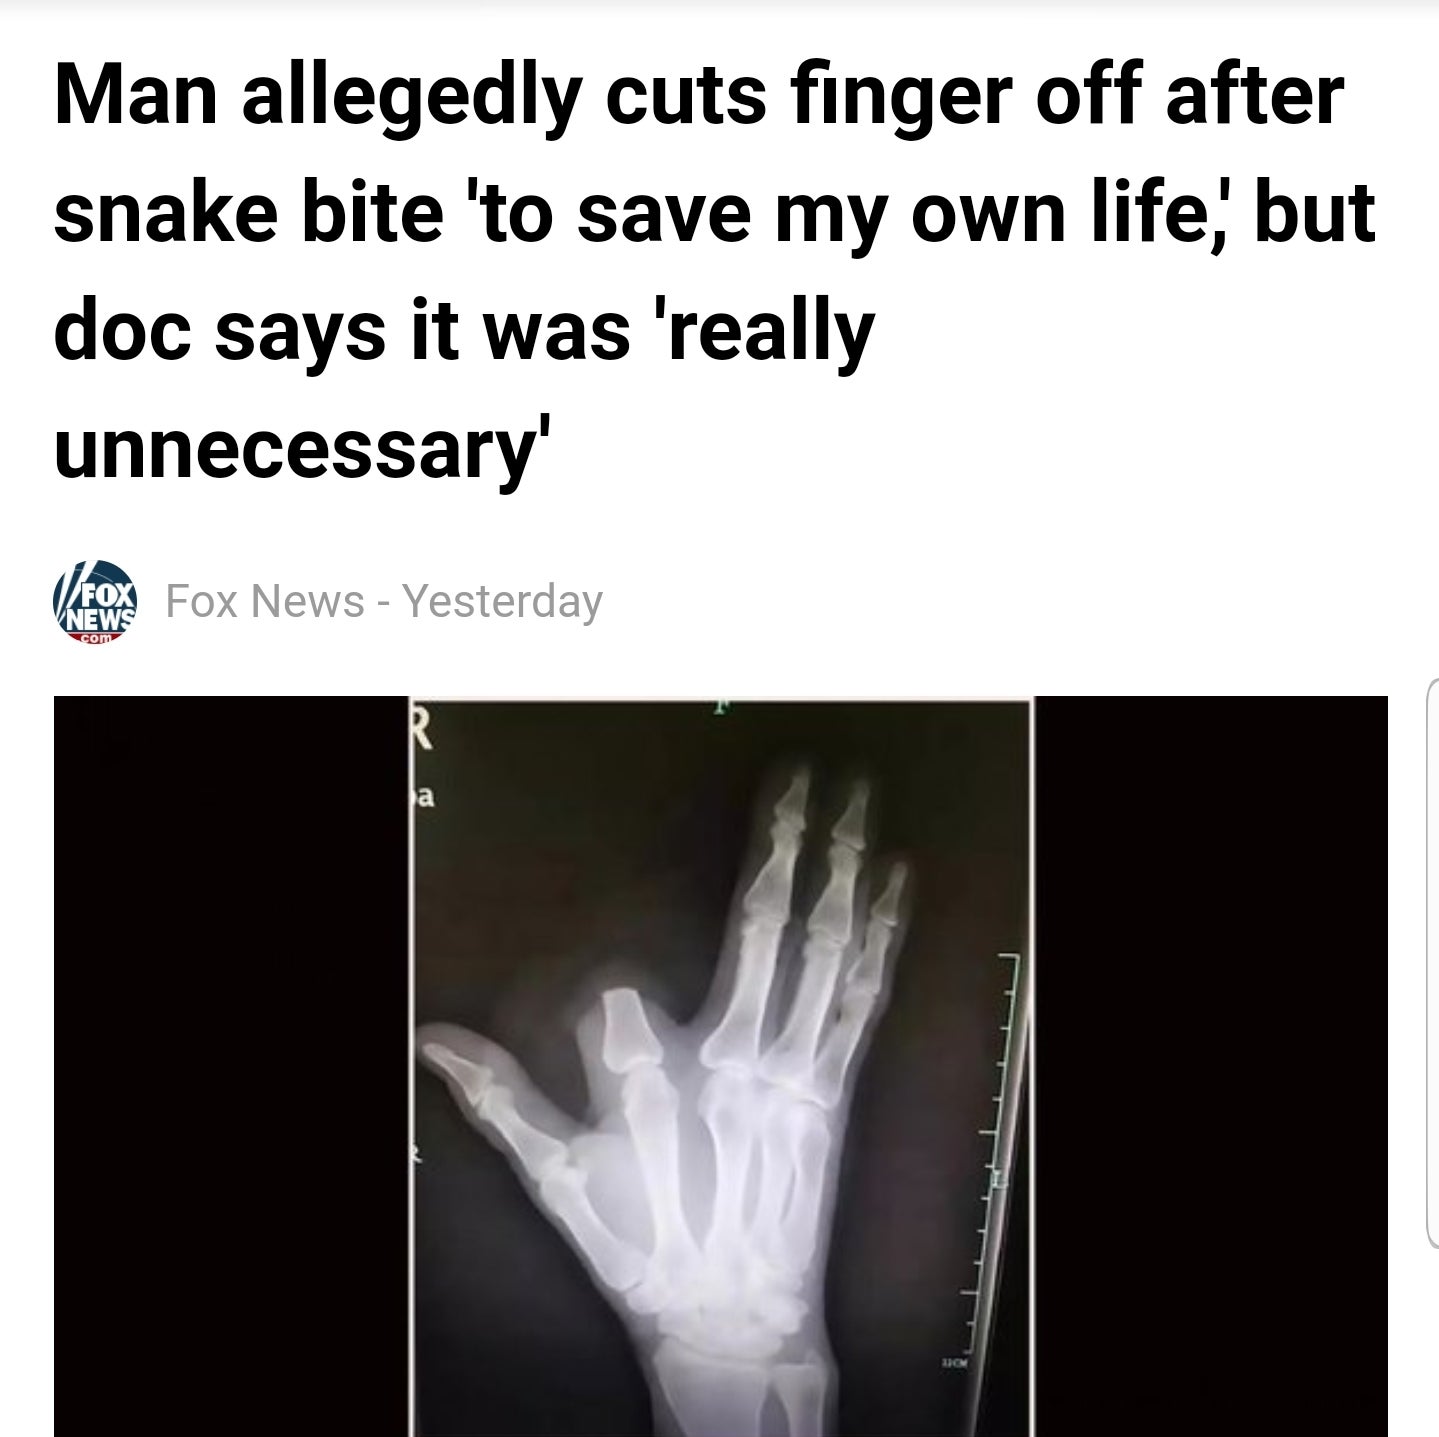 hand - Man allegedly cuts finger off after snake bite 'to save my own life, but doc says it was 'really unnecessary' Fox News Eos Fox News Yesterday com No